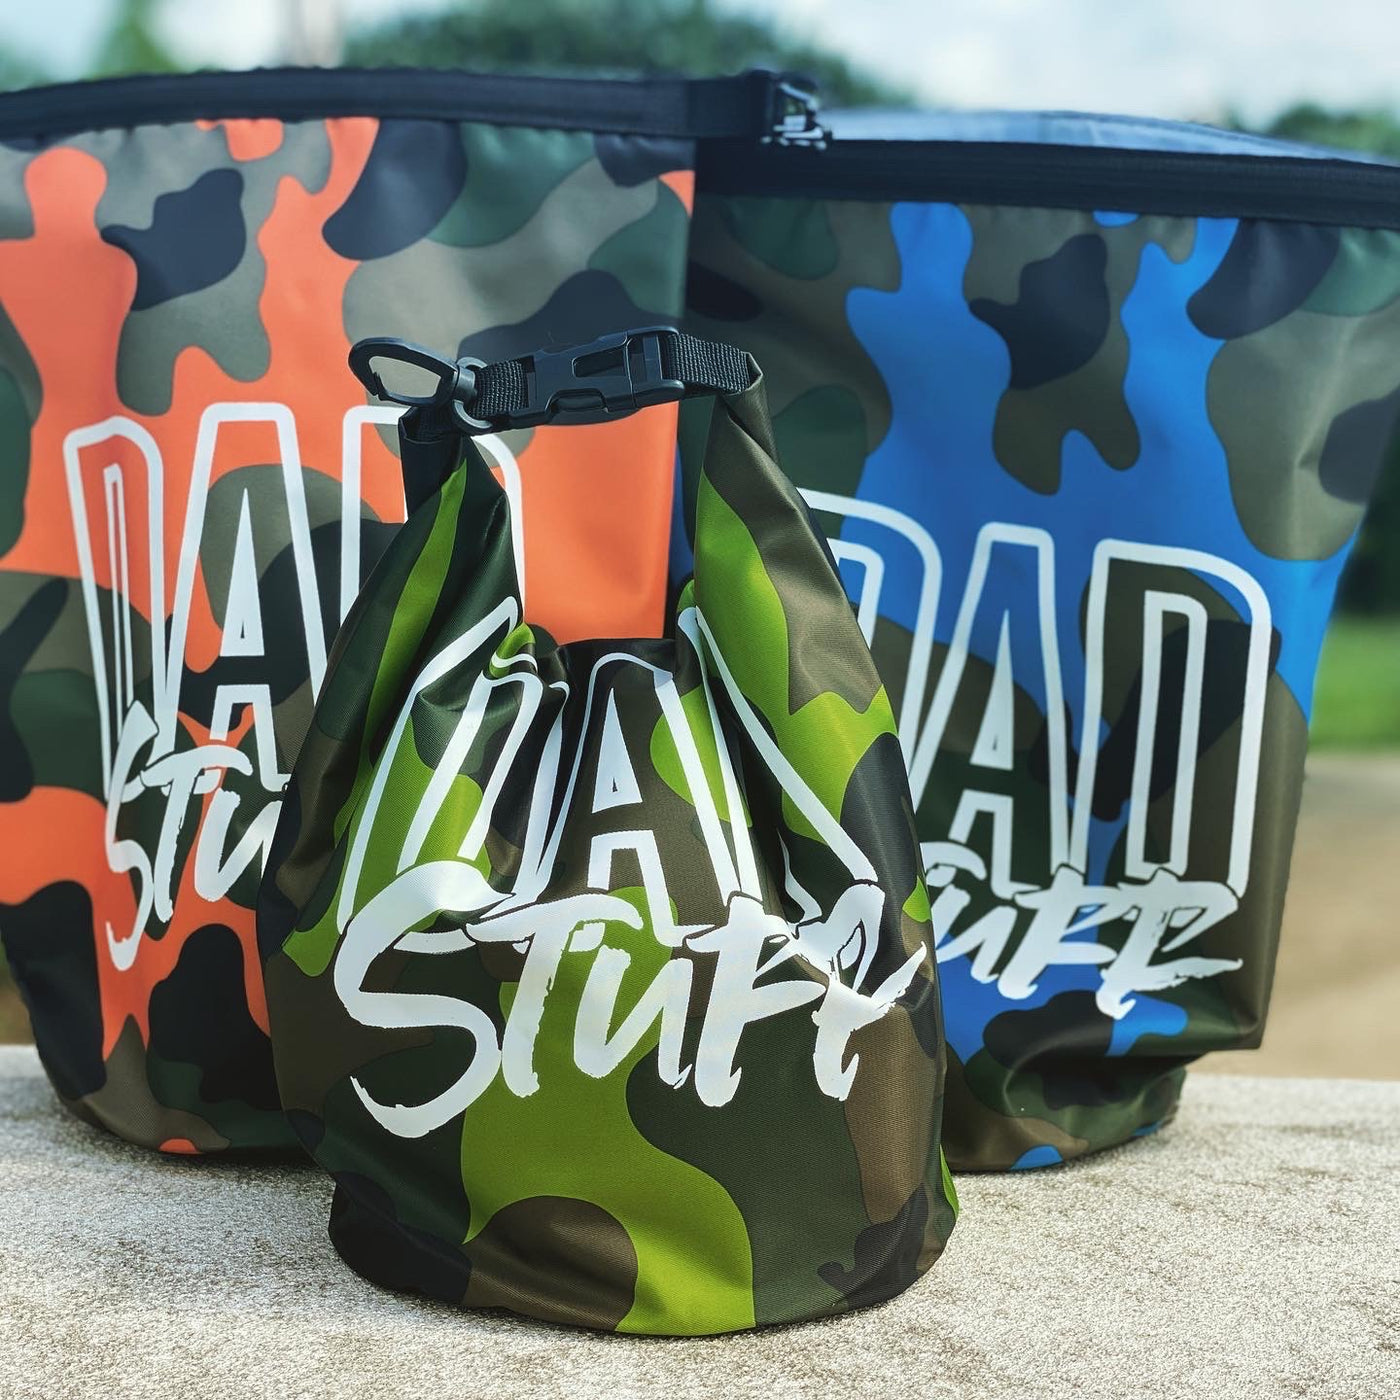 All three colors of camo dry bags with the words Dad Stuff